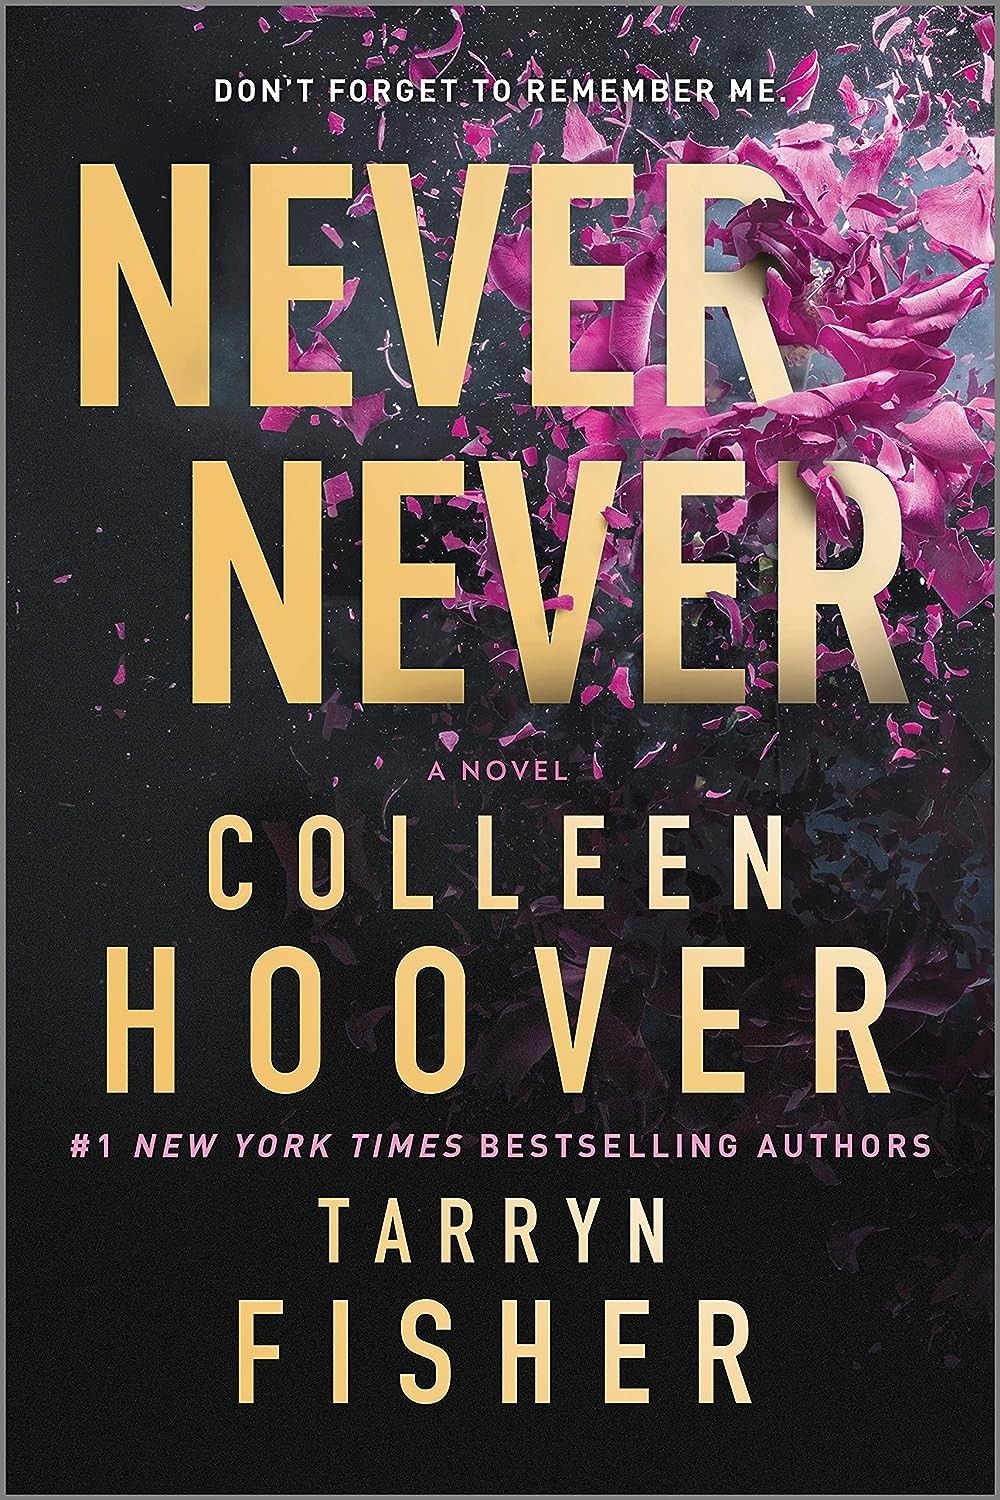 20 Best Colleen Hoover Books, Ranked